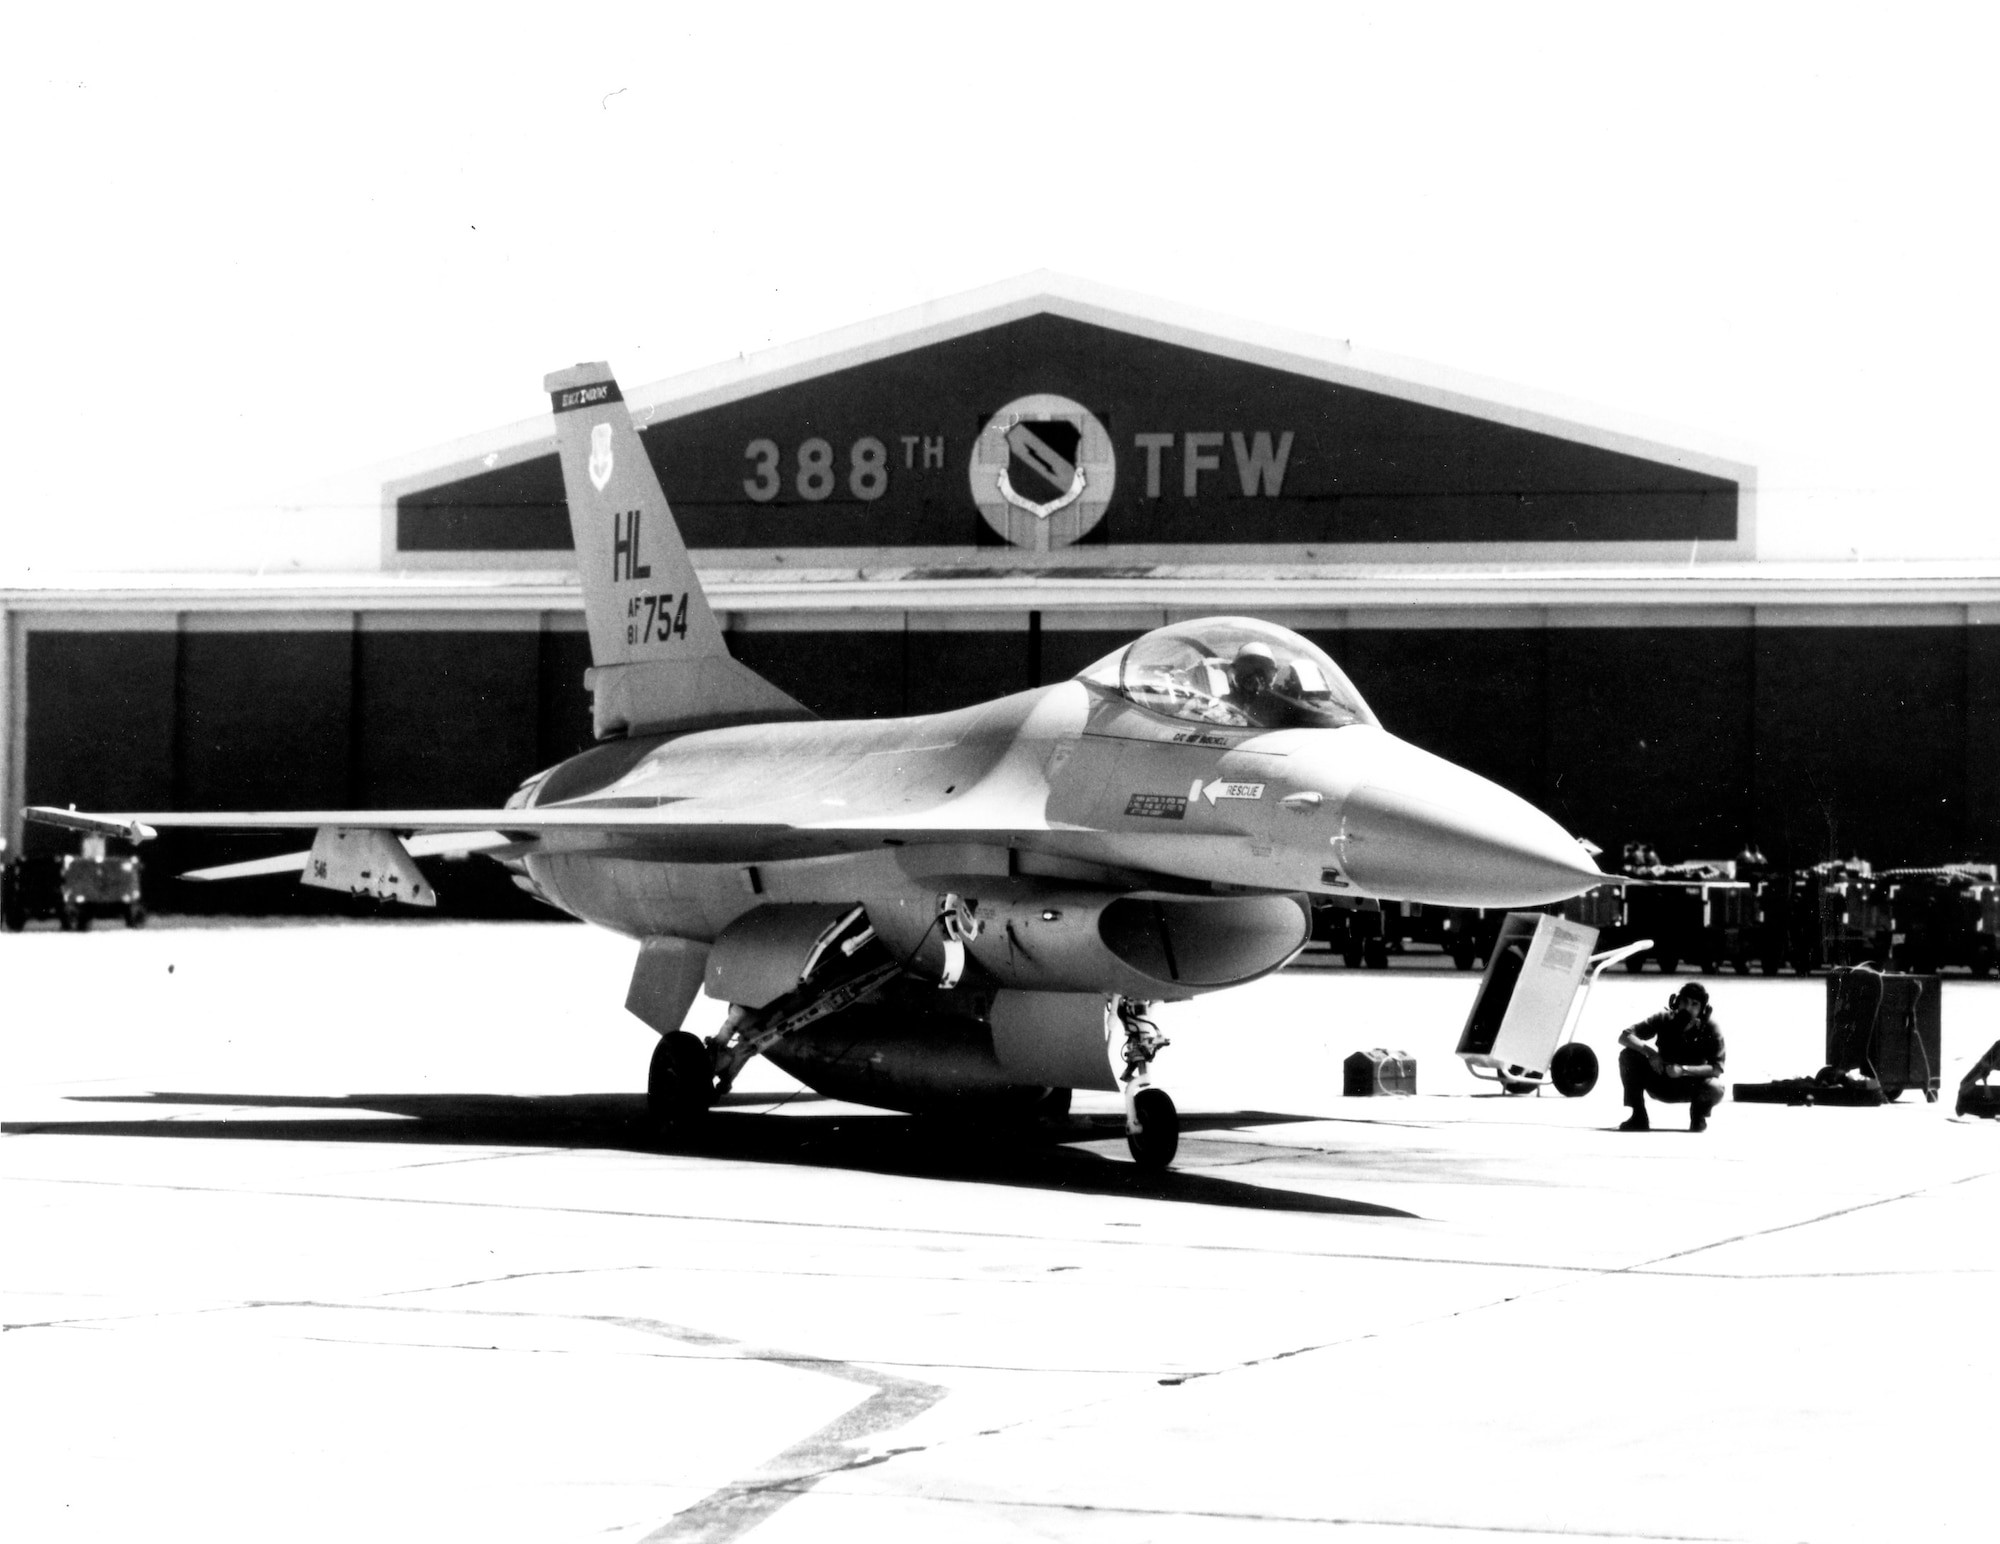 Upon arrival of its assigned new fourth-generation F-16 lightweight fighter aircraft during 1979, the 388th Tactical Fighter Wing became the first operational F-16 unit in the Air Force.